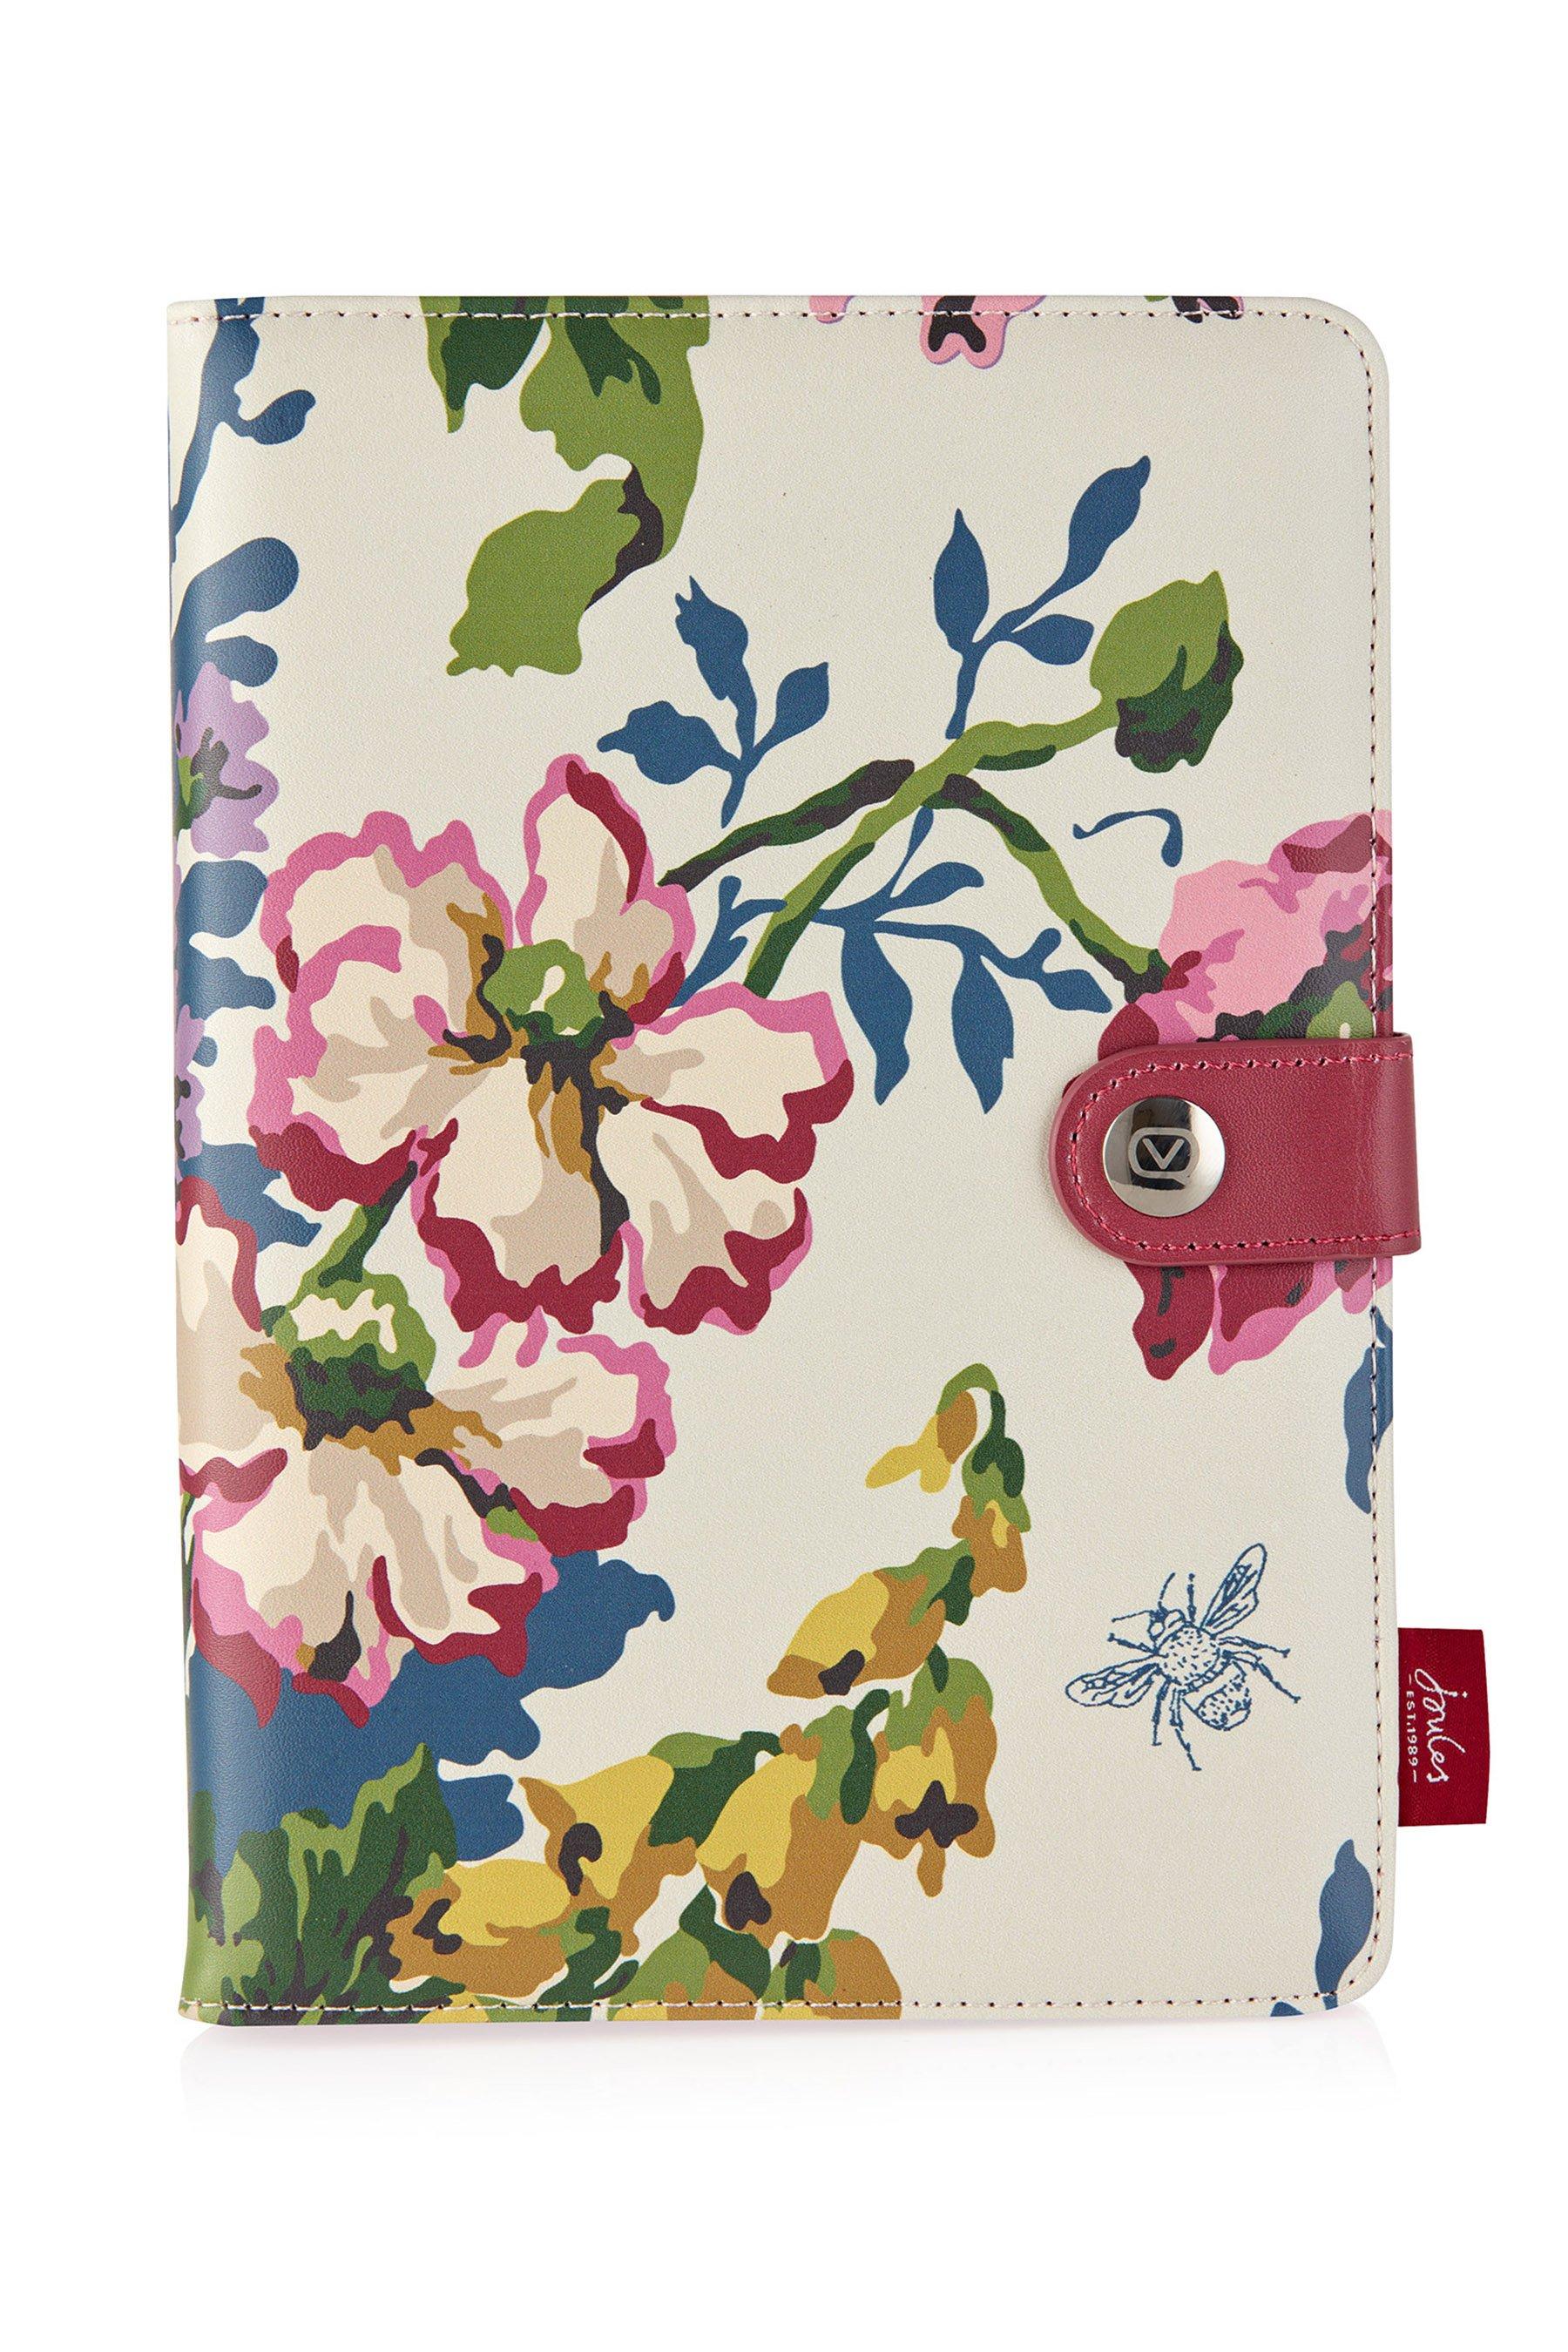 vq 7/8 inch tablet case – joules cambridge floral cream - natural